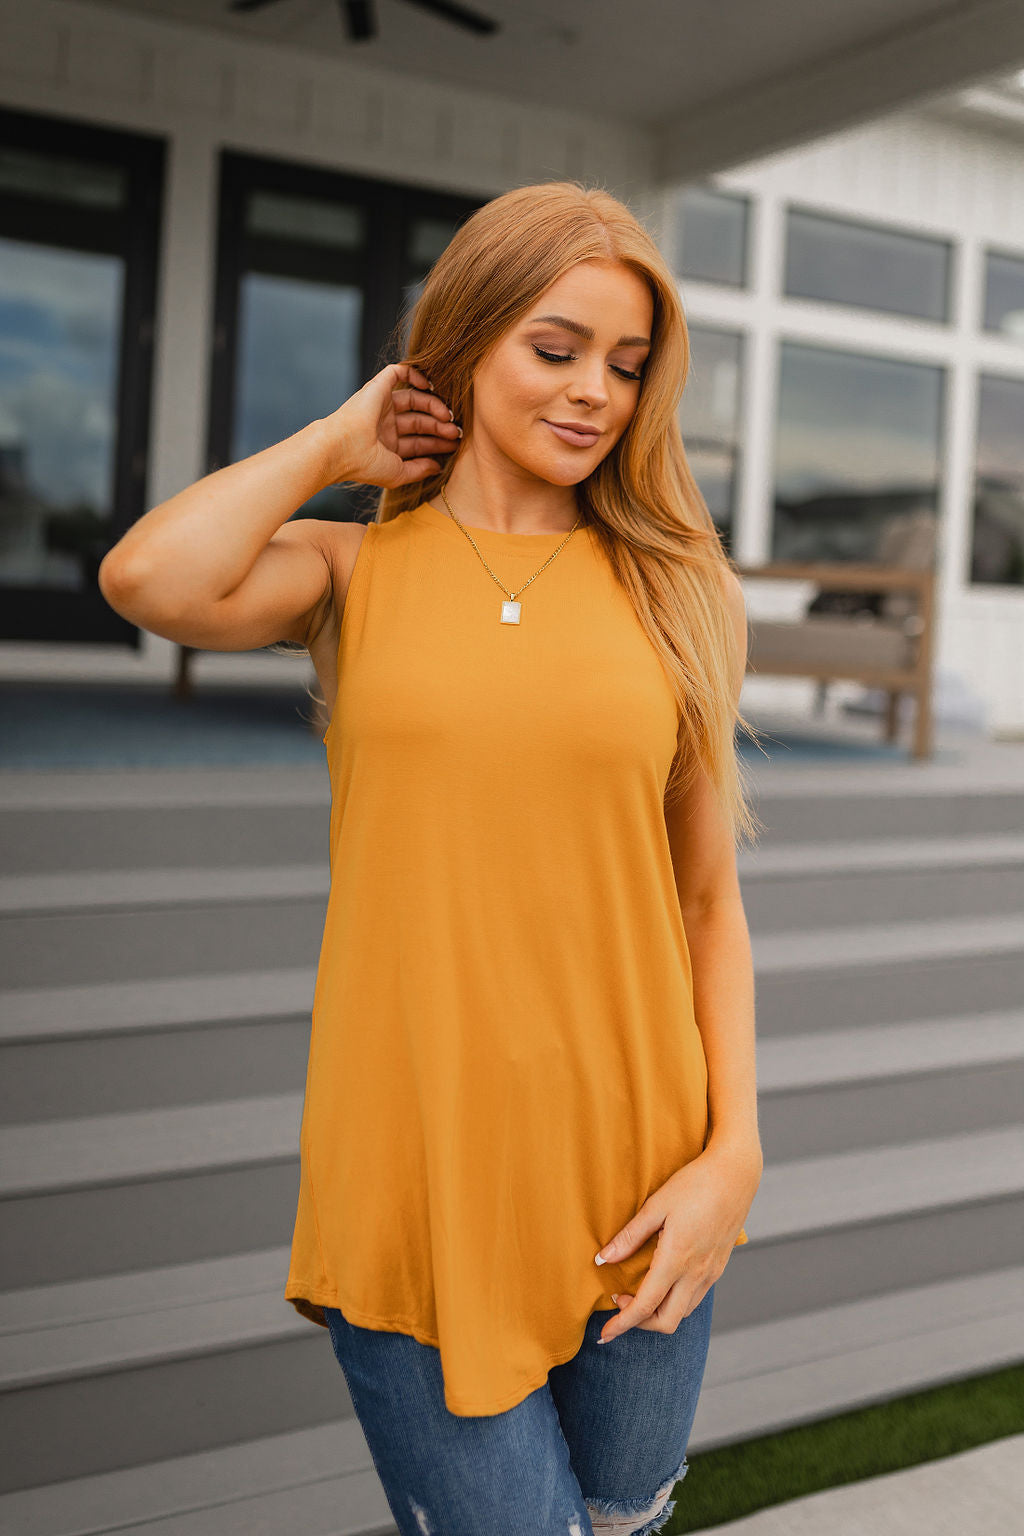 From Summer to Fall Hi-Low Sleeveless Top in Mustard